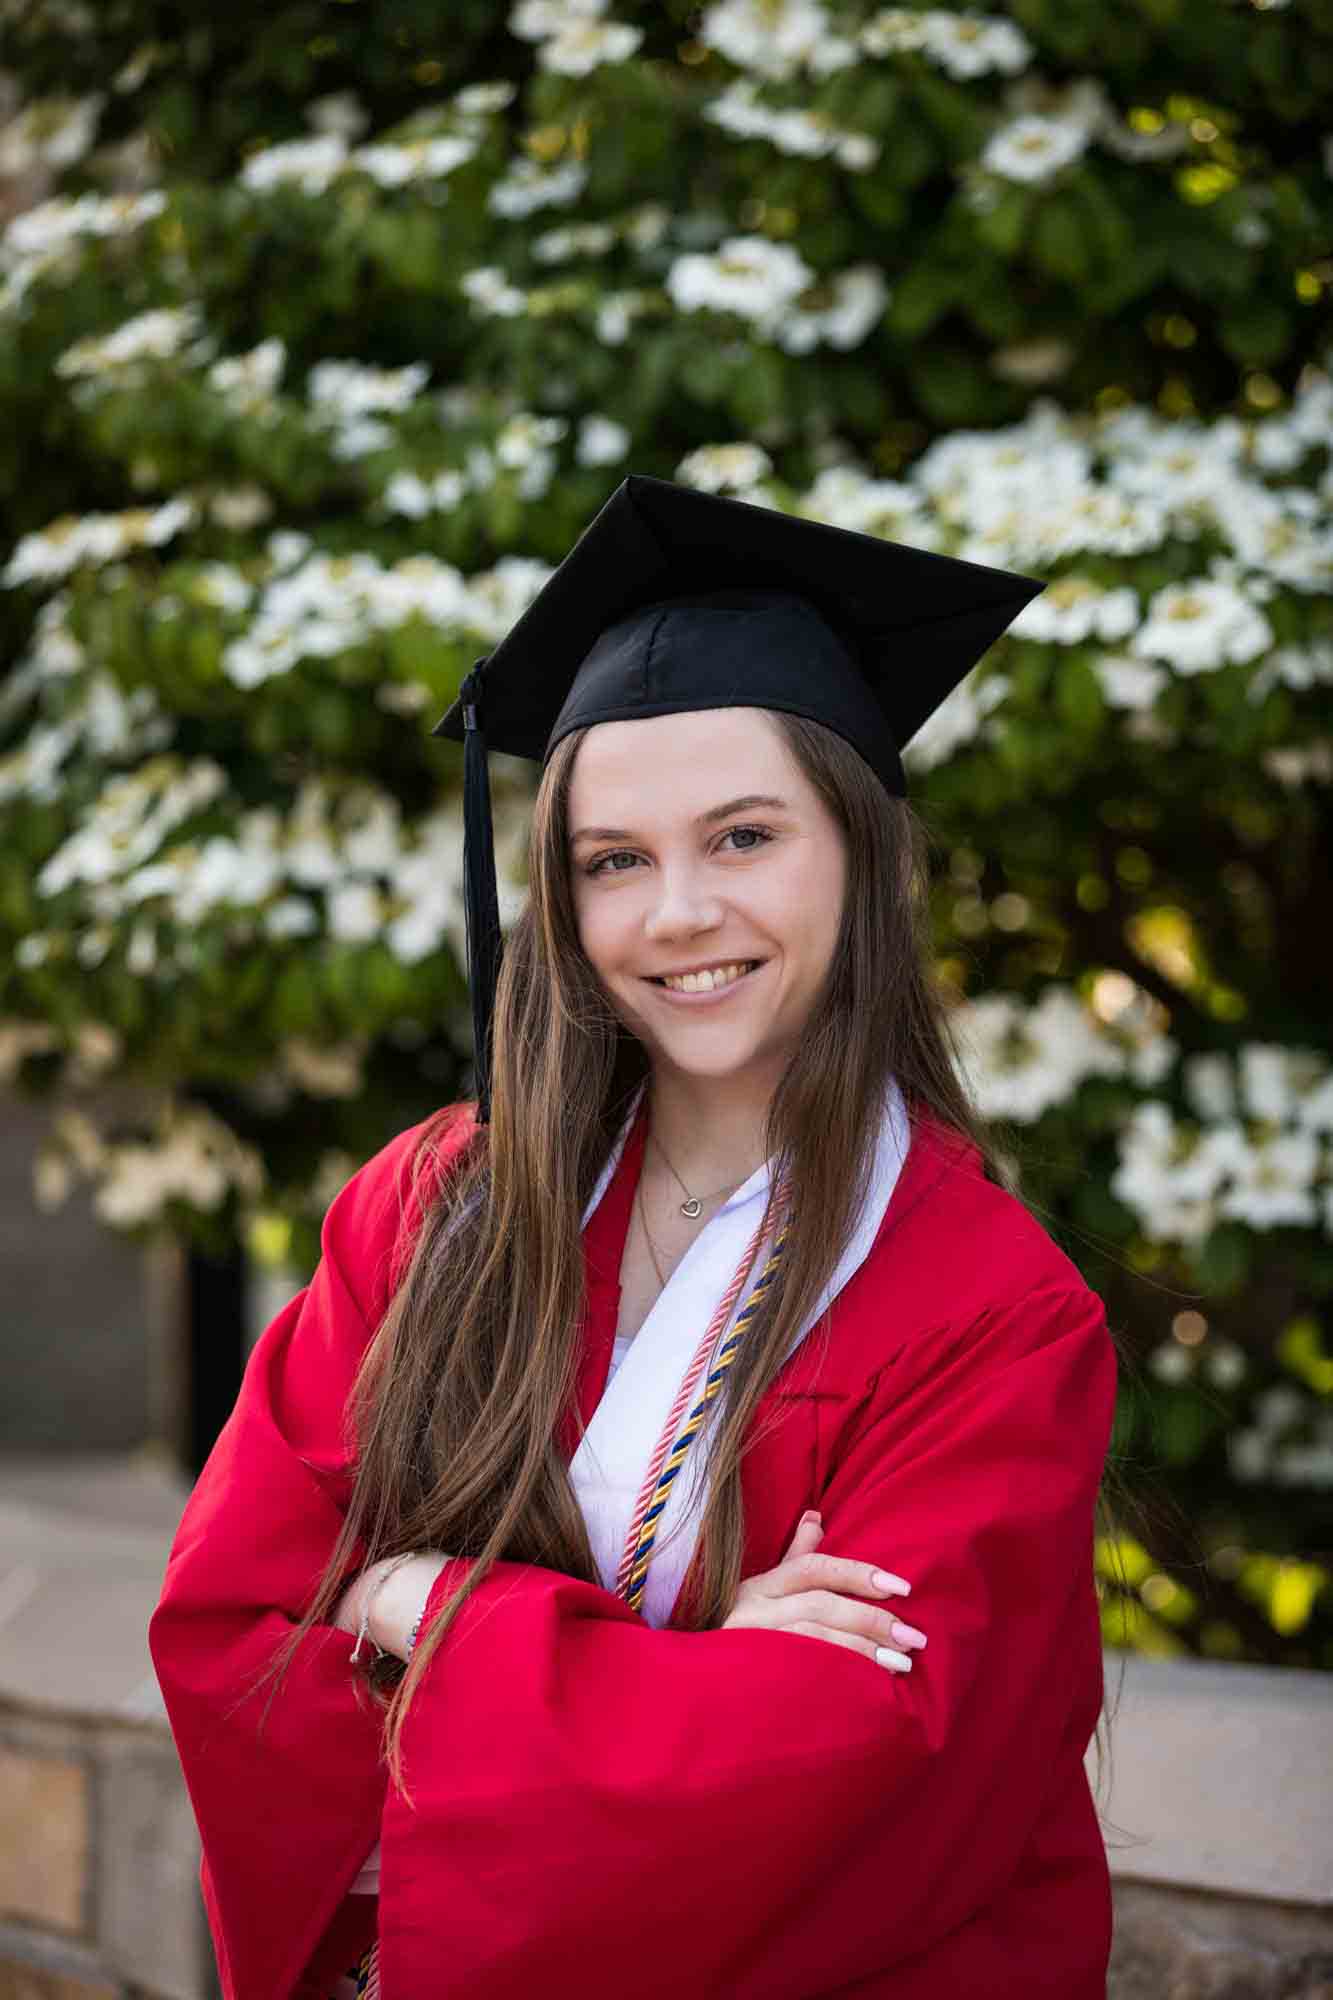 Female graduate in front of white flowering bush wearing red robe and graduation cap for an article on graduation portrait photo tips